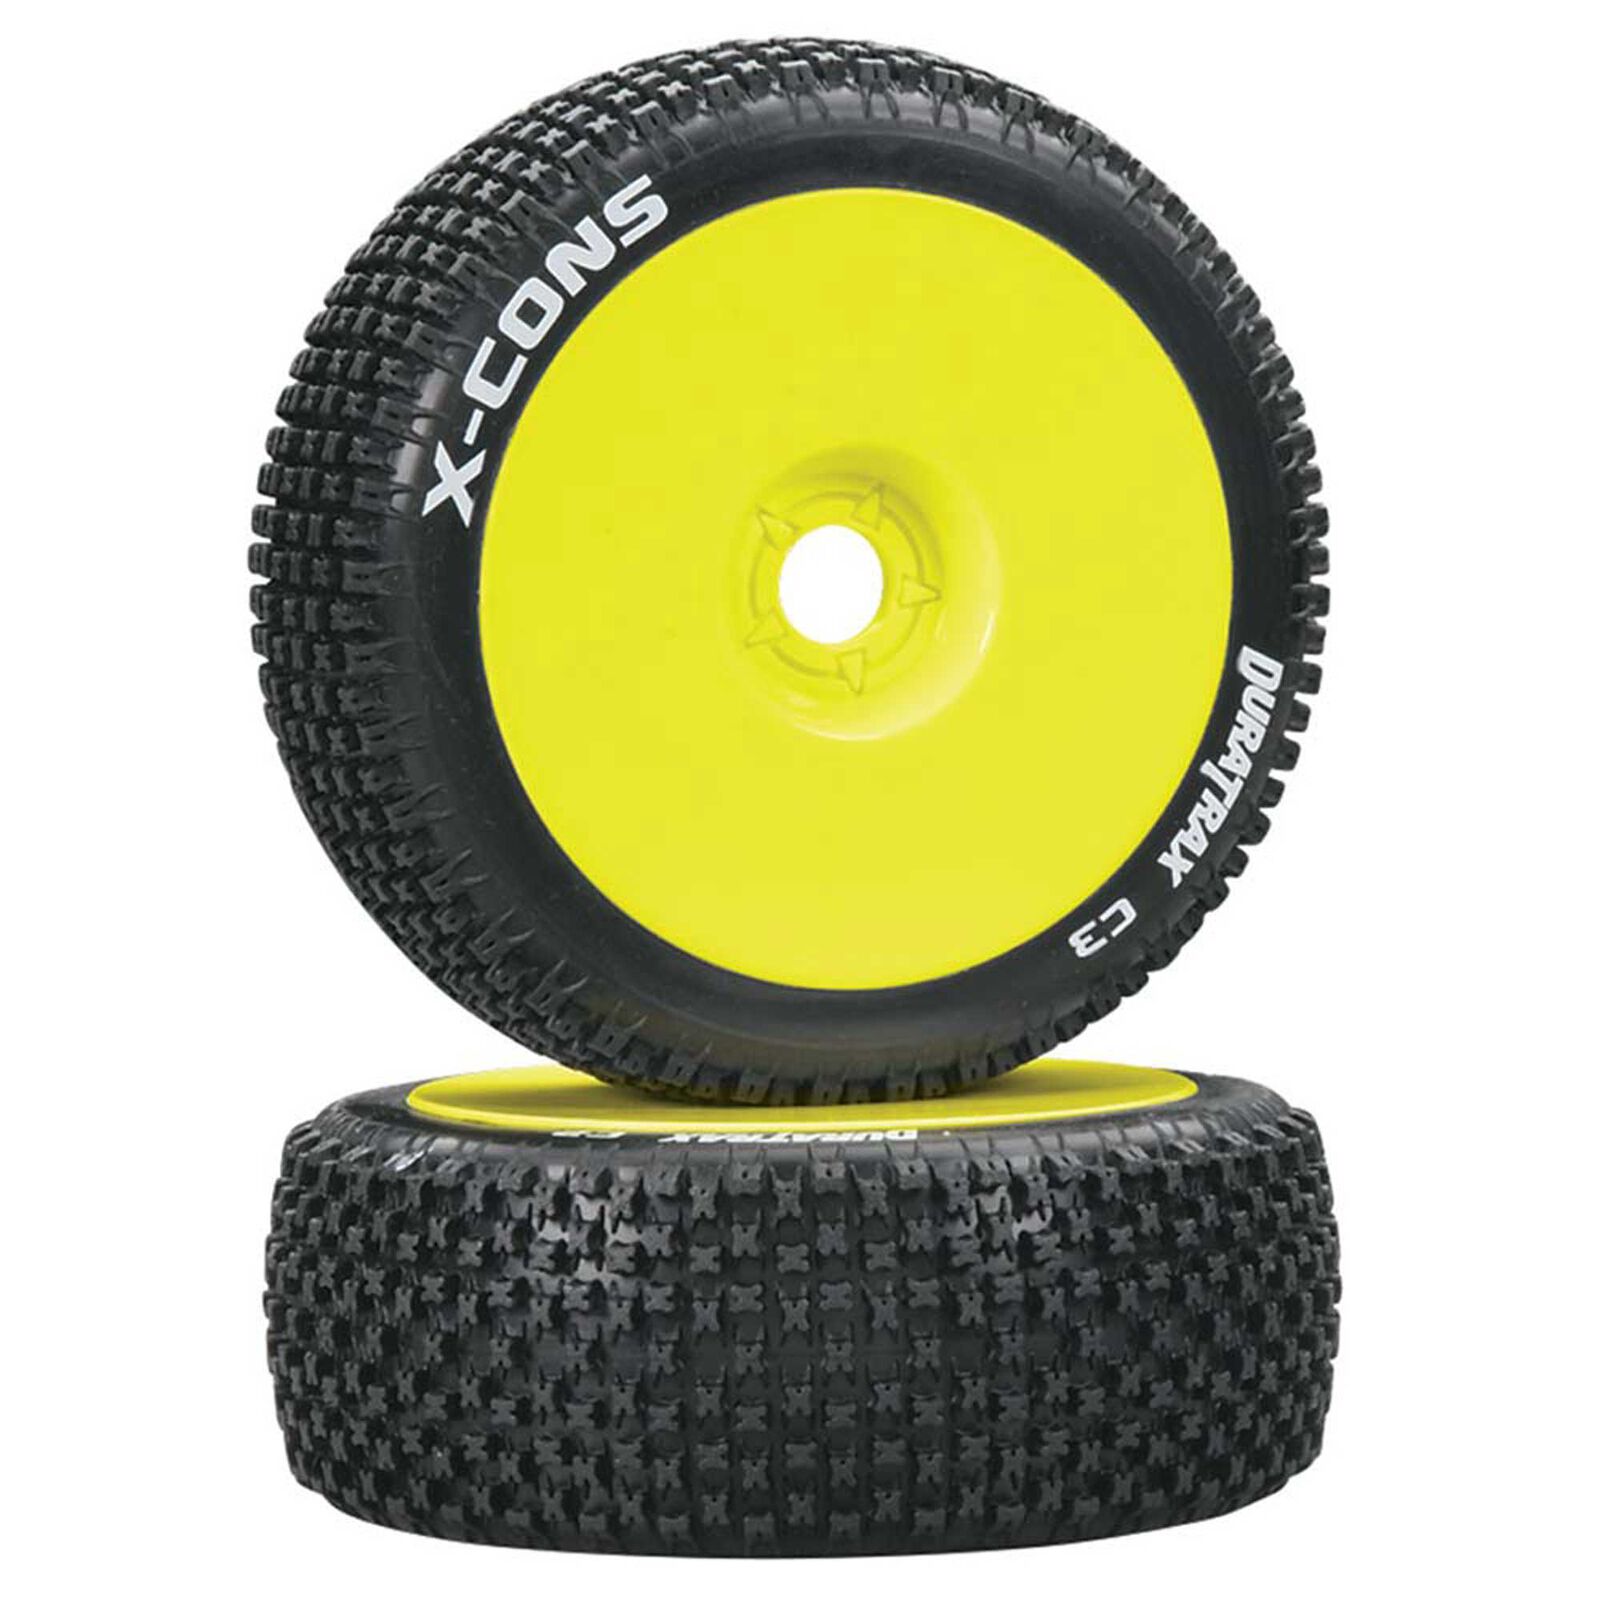 X-Cons 1/8 C3 Mounted Buggy Tires, Yellow (2)